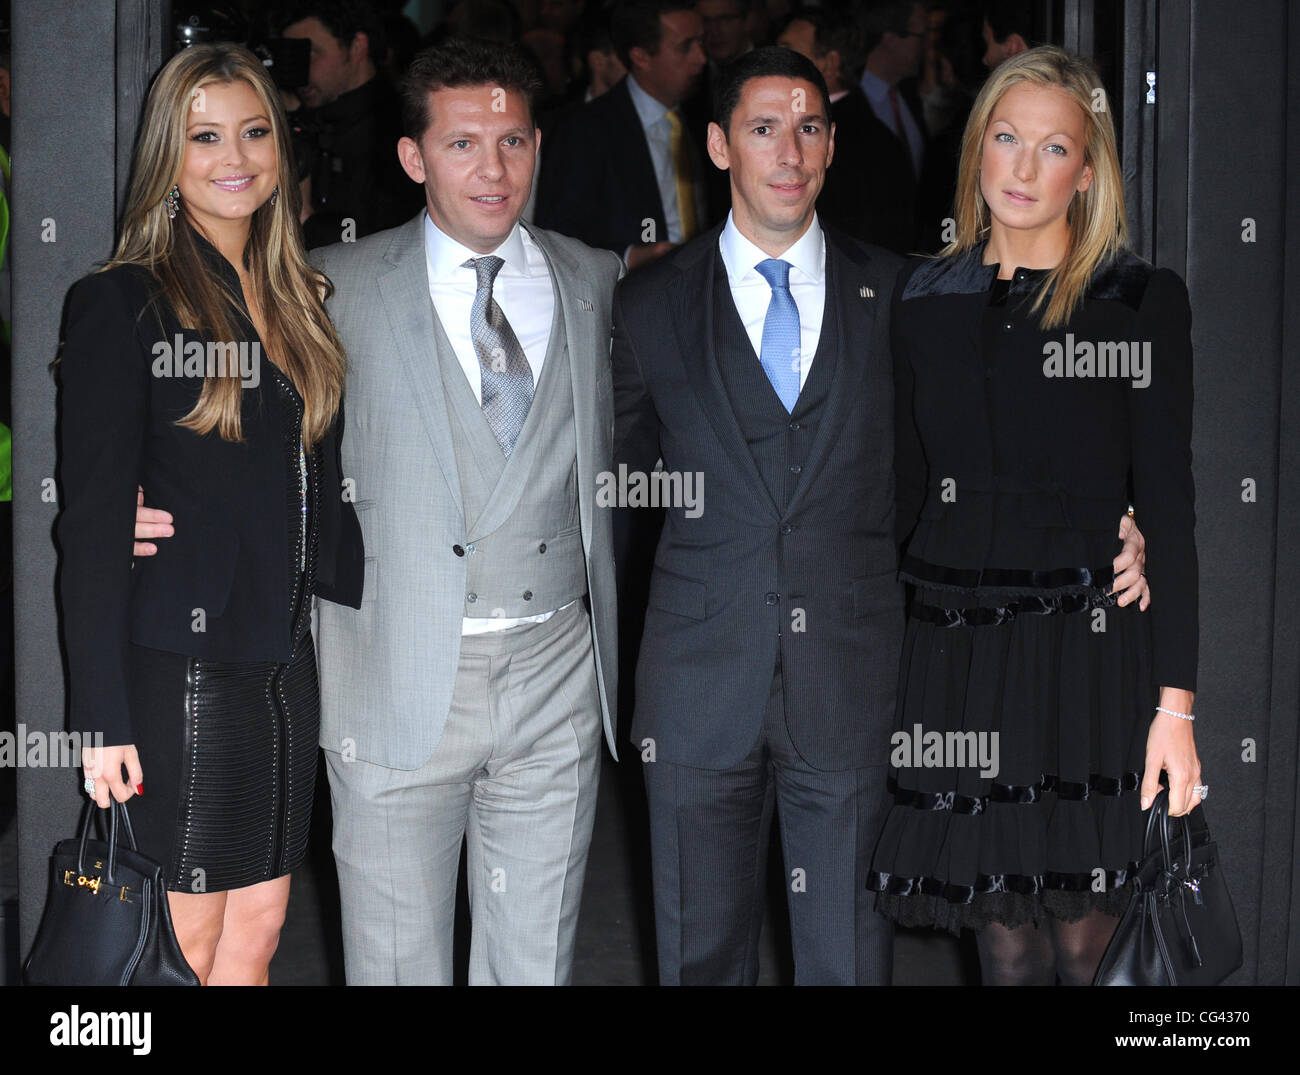 Holly Valance, boyfriend Nick Candy, Christian Candy and his wife Emily Crompton arriving for the One Hyde Park launch event  London, England - 19.01.11 Credit Mandatory: Zak Hussein/WENN.com Stock Photo